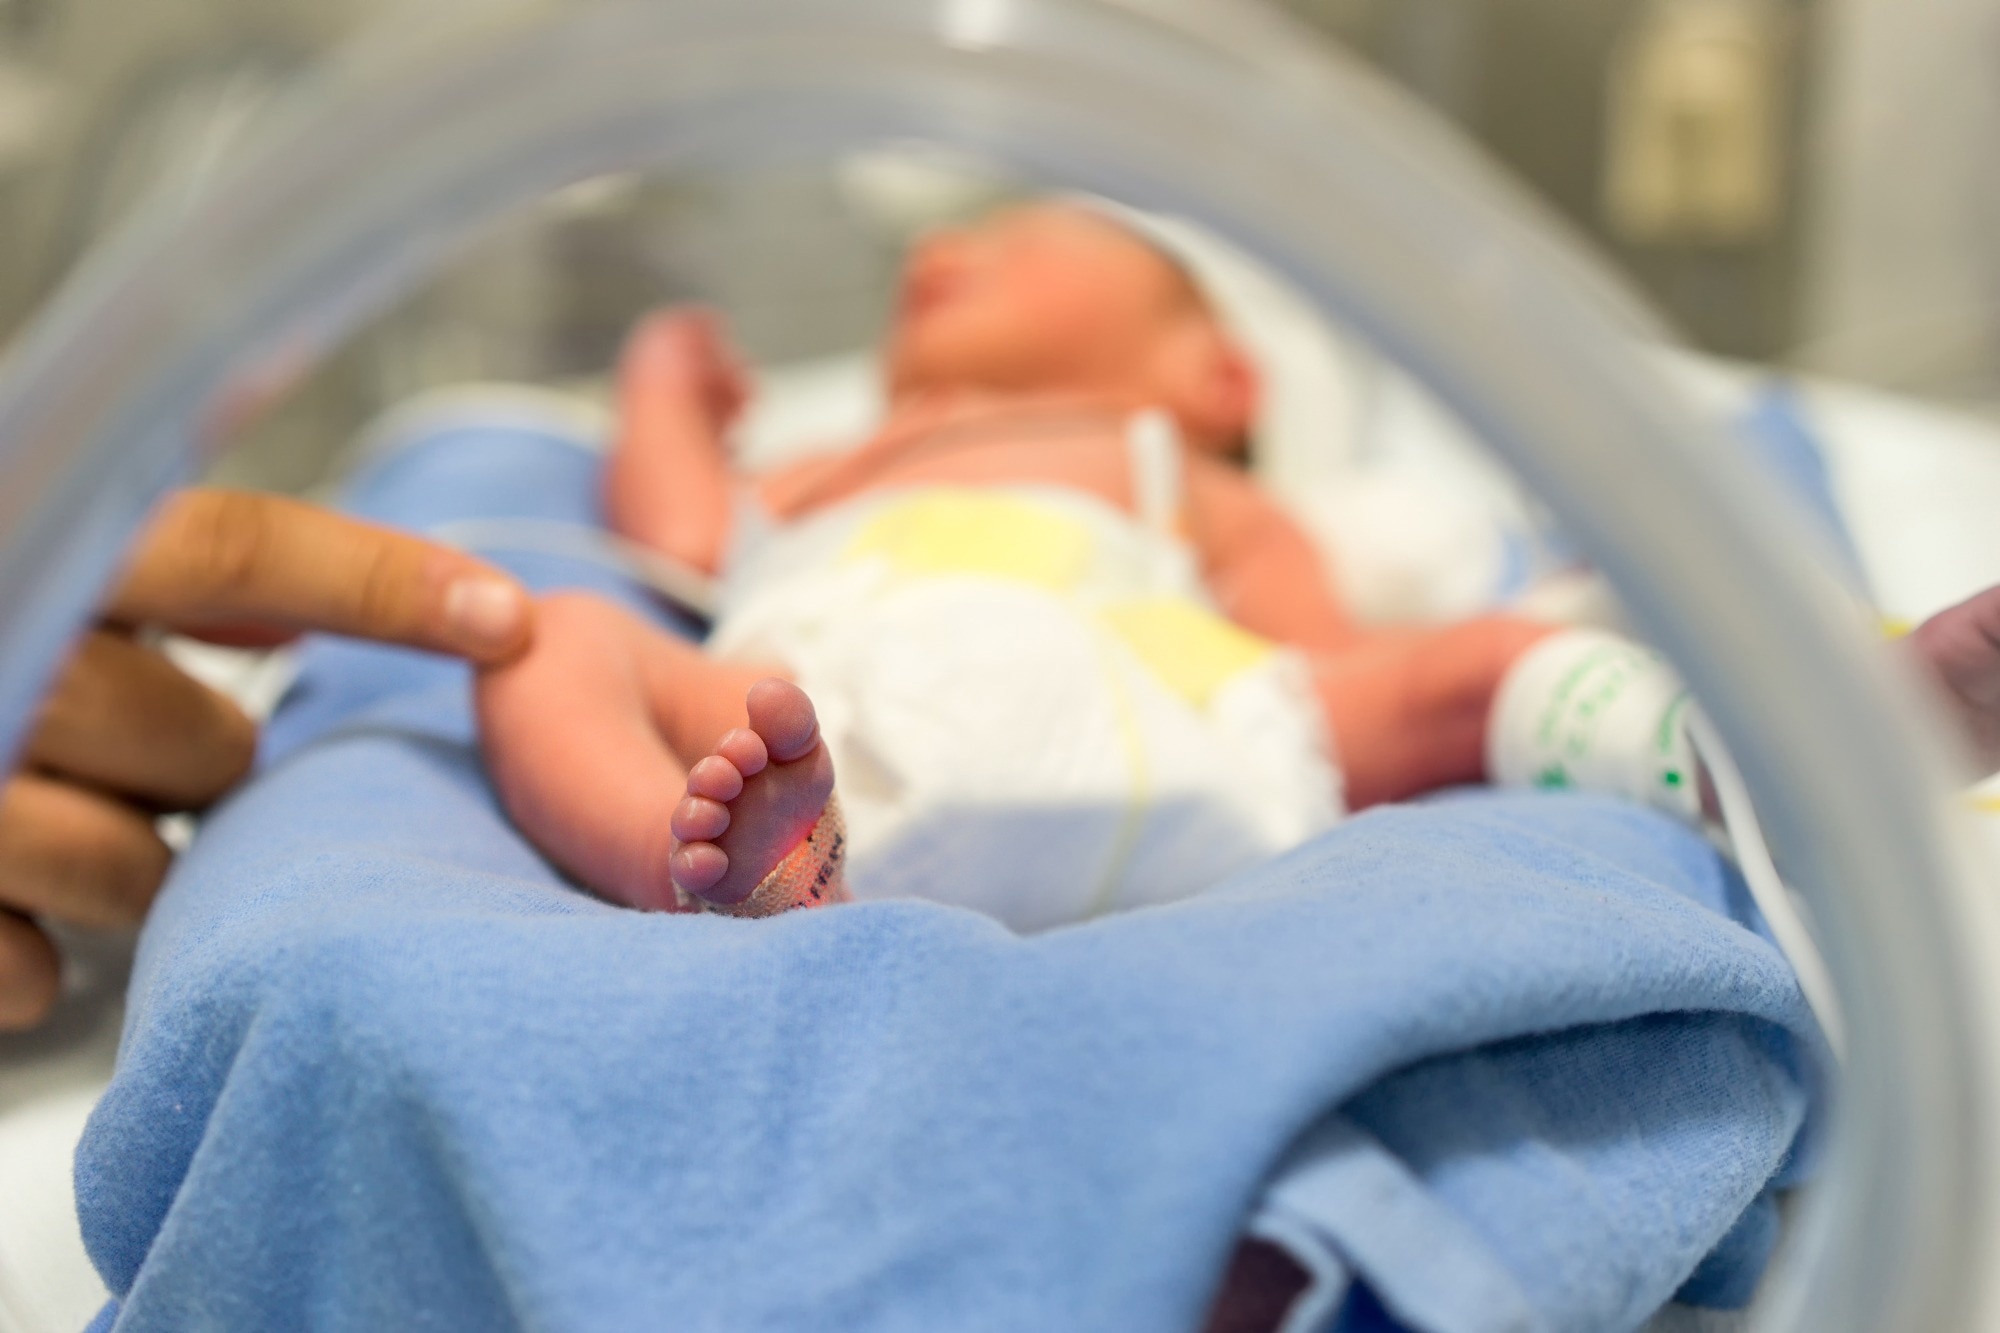 Study: Interplay of gestational parent exposure to ambient air pollution and diet characteristics on preterm birth. Image Credit: Kursad Sezgin / Shutterstock.com